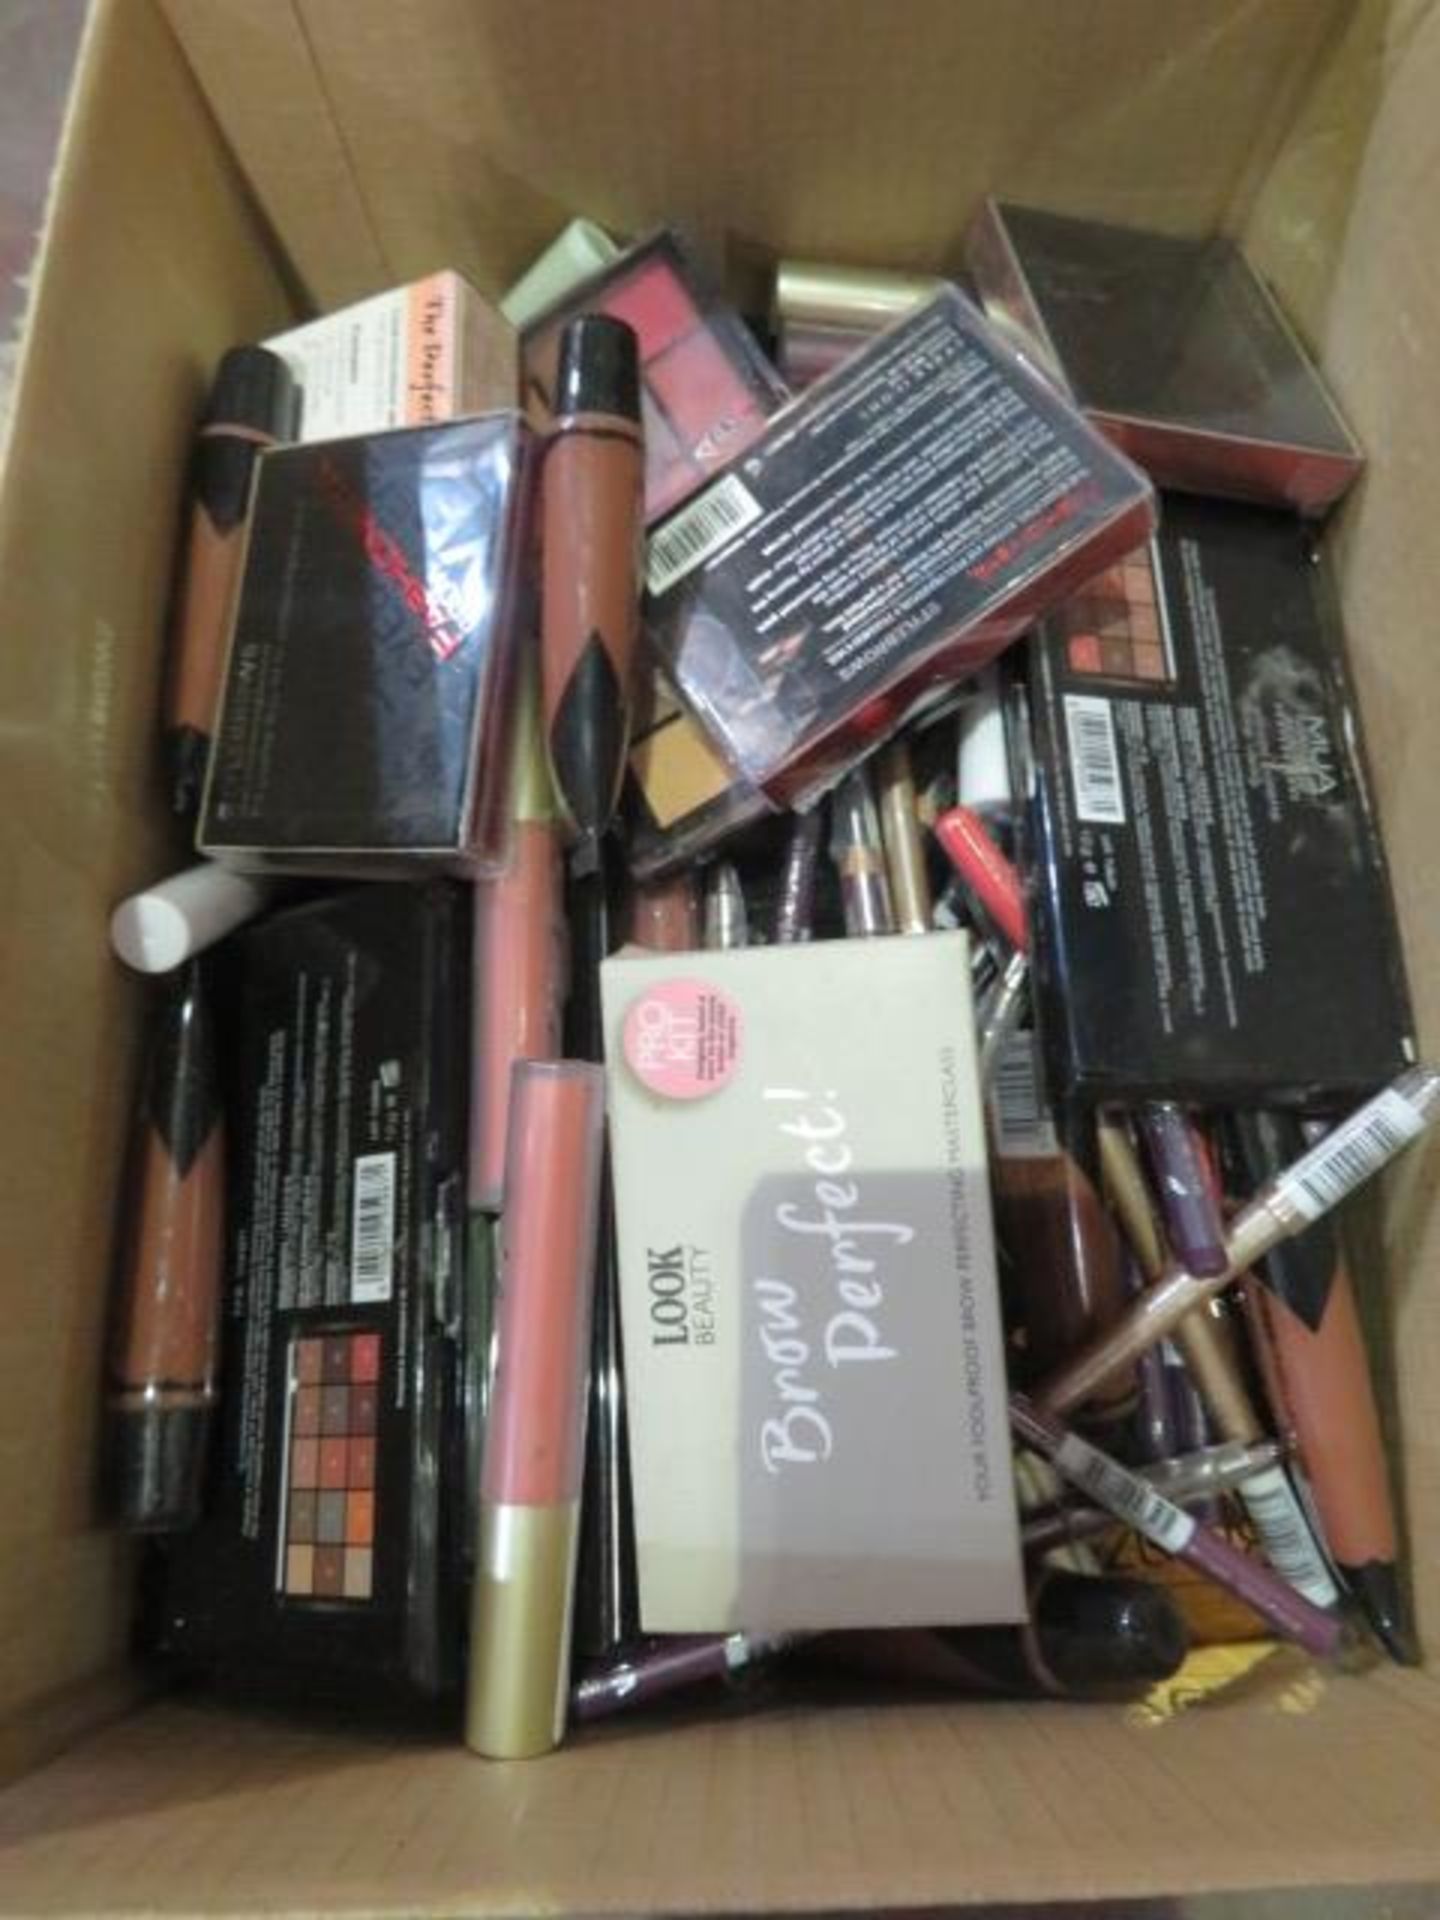 (Z93) Circa. 200 items of various new make up acadamy make up to include: style brows essential...